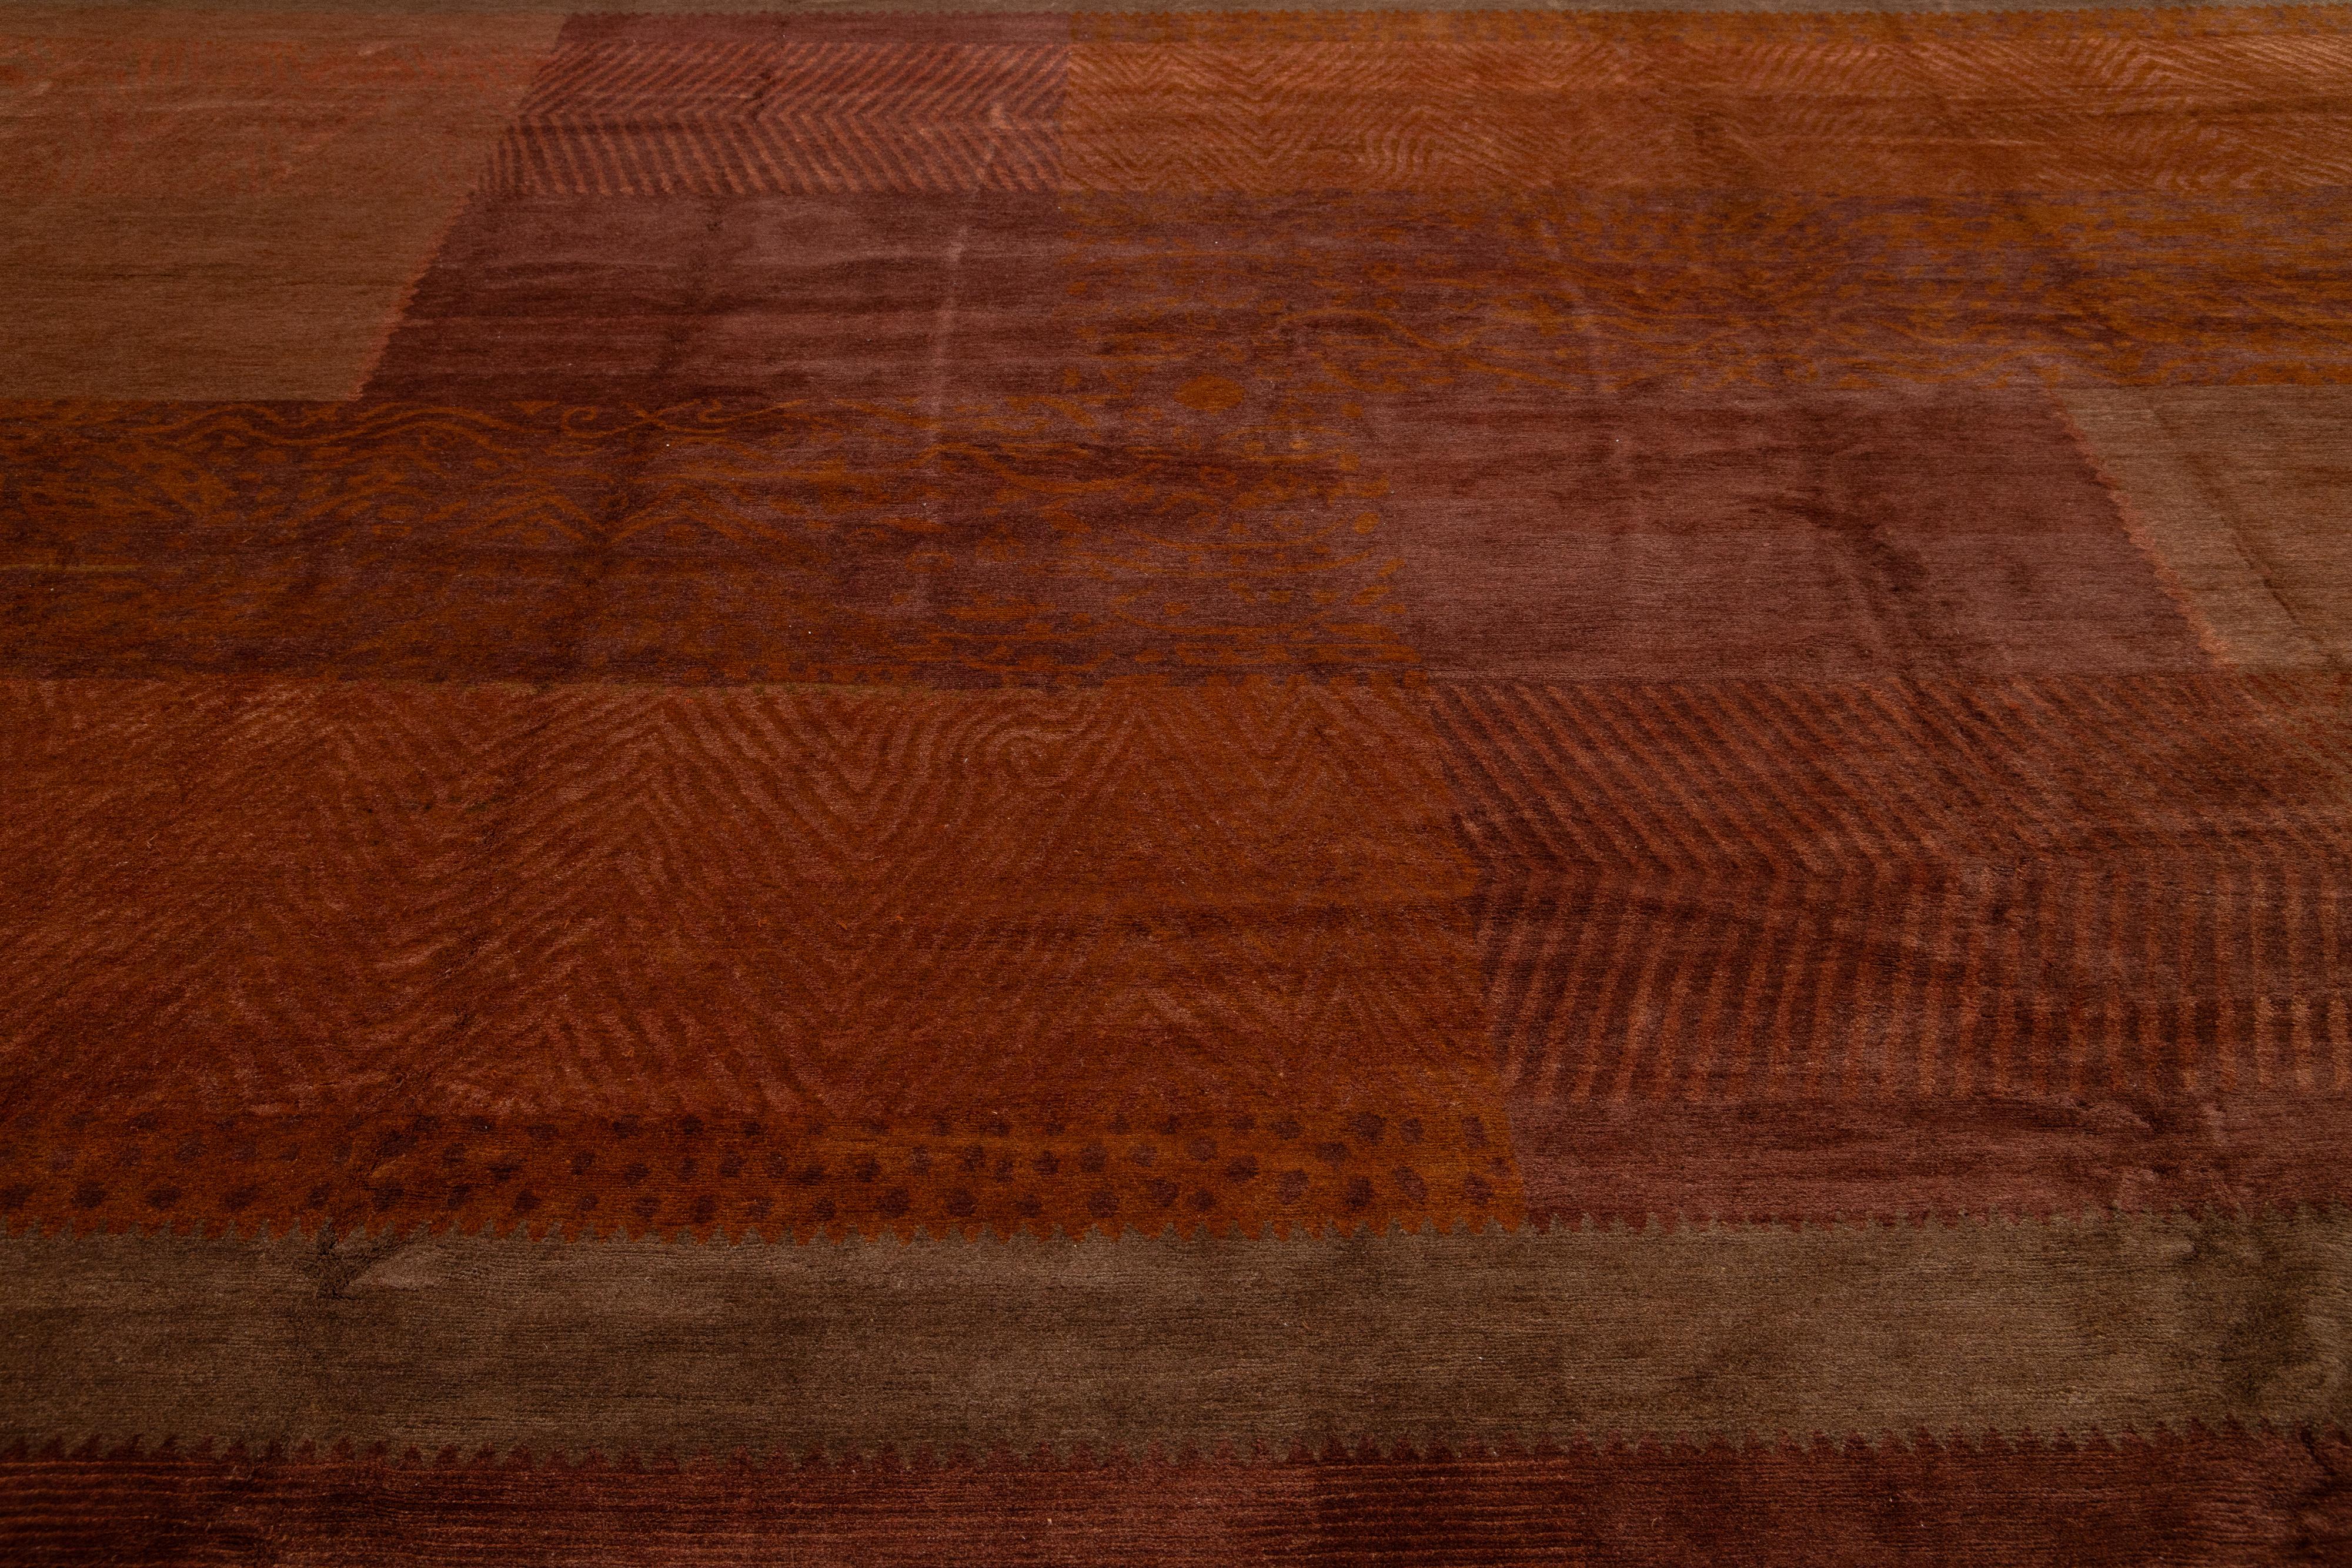 Contemporary Modern Tibetan Wool & Silk Rug With Geometric Pattern In Rust Color For Sale